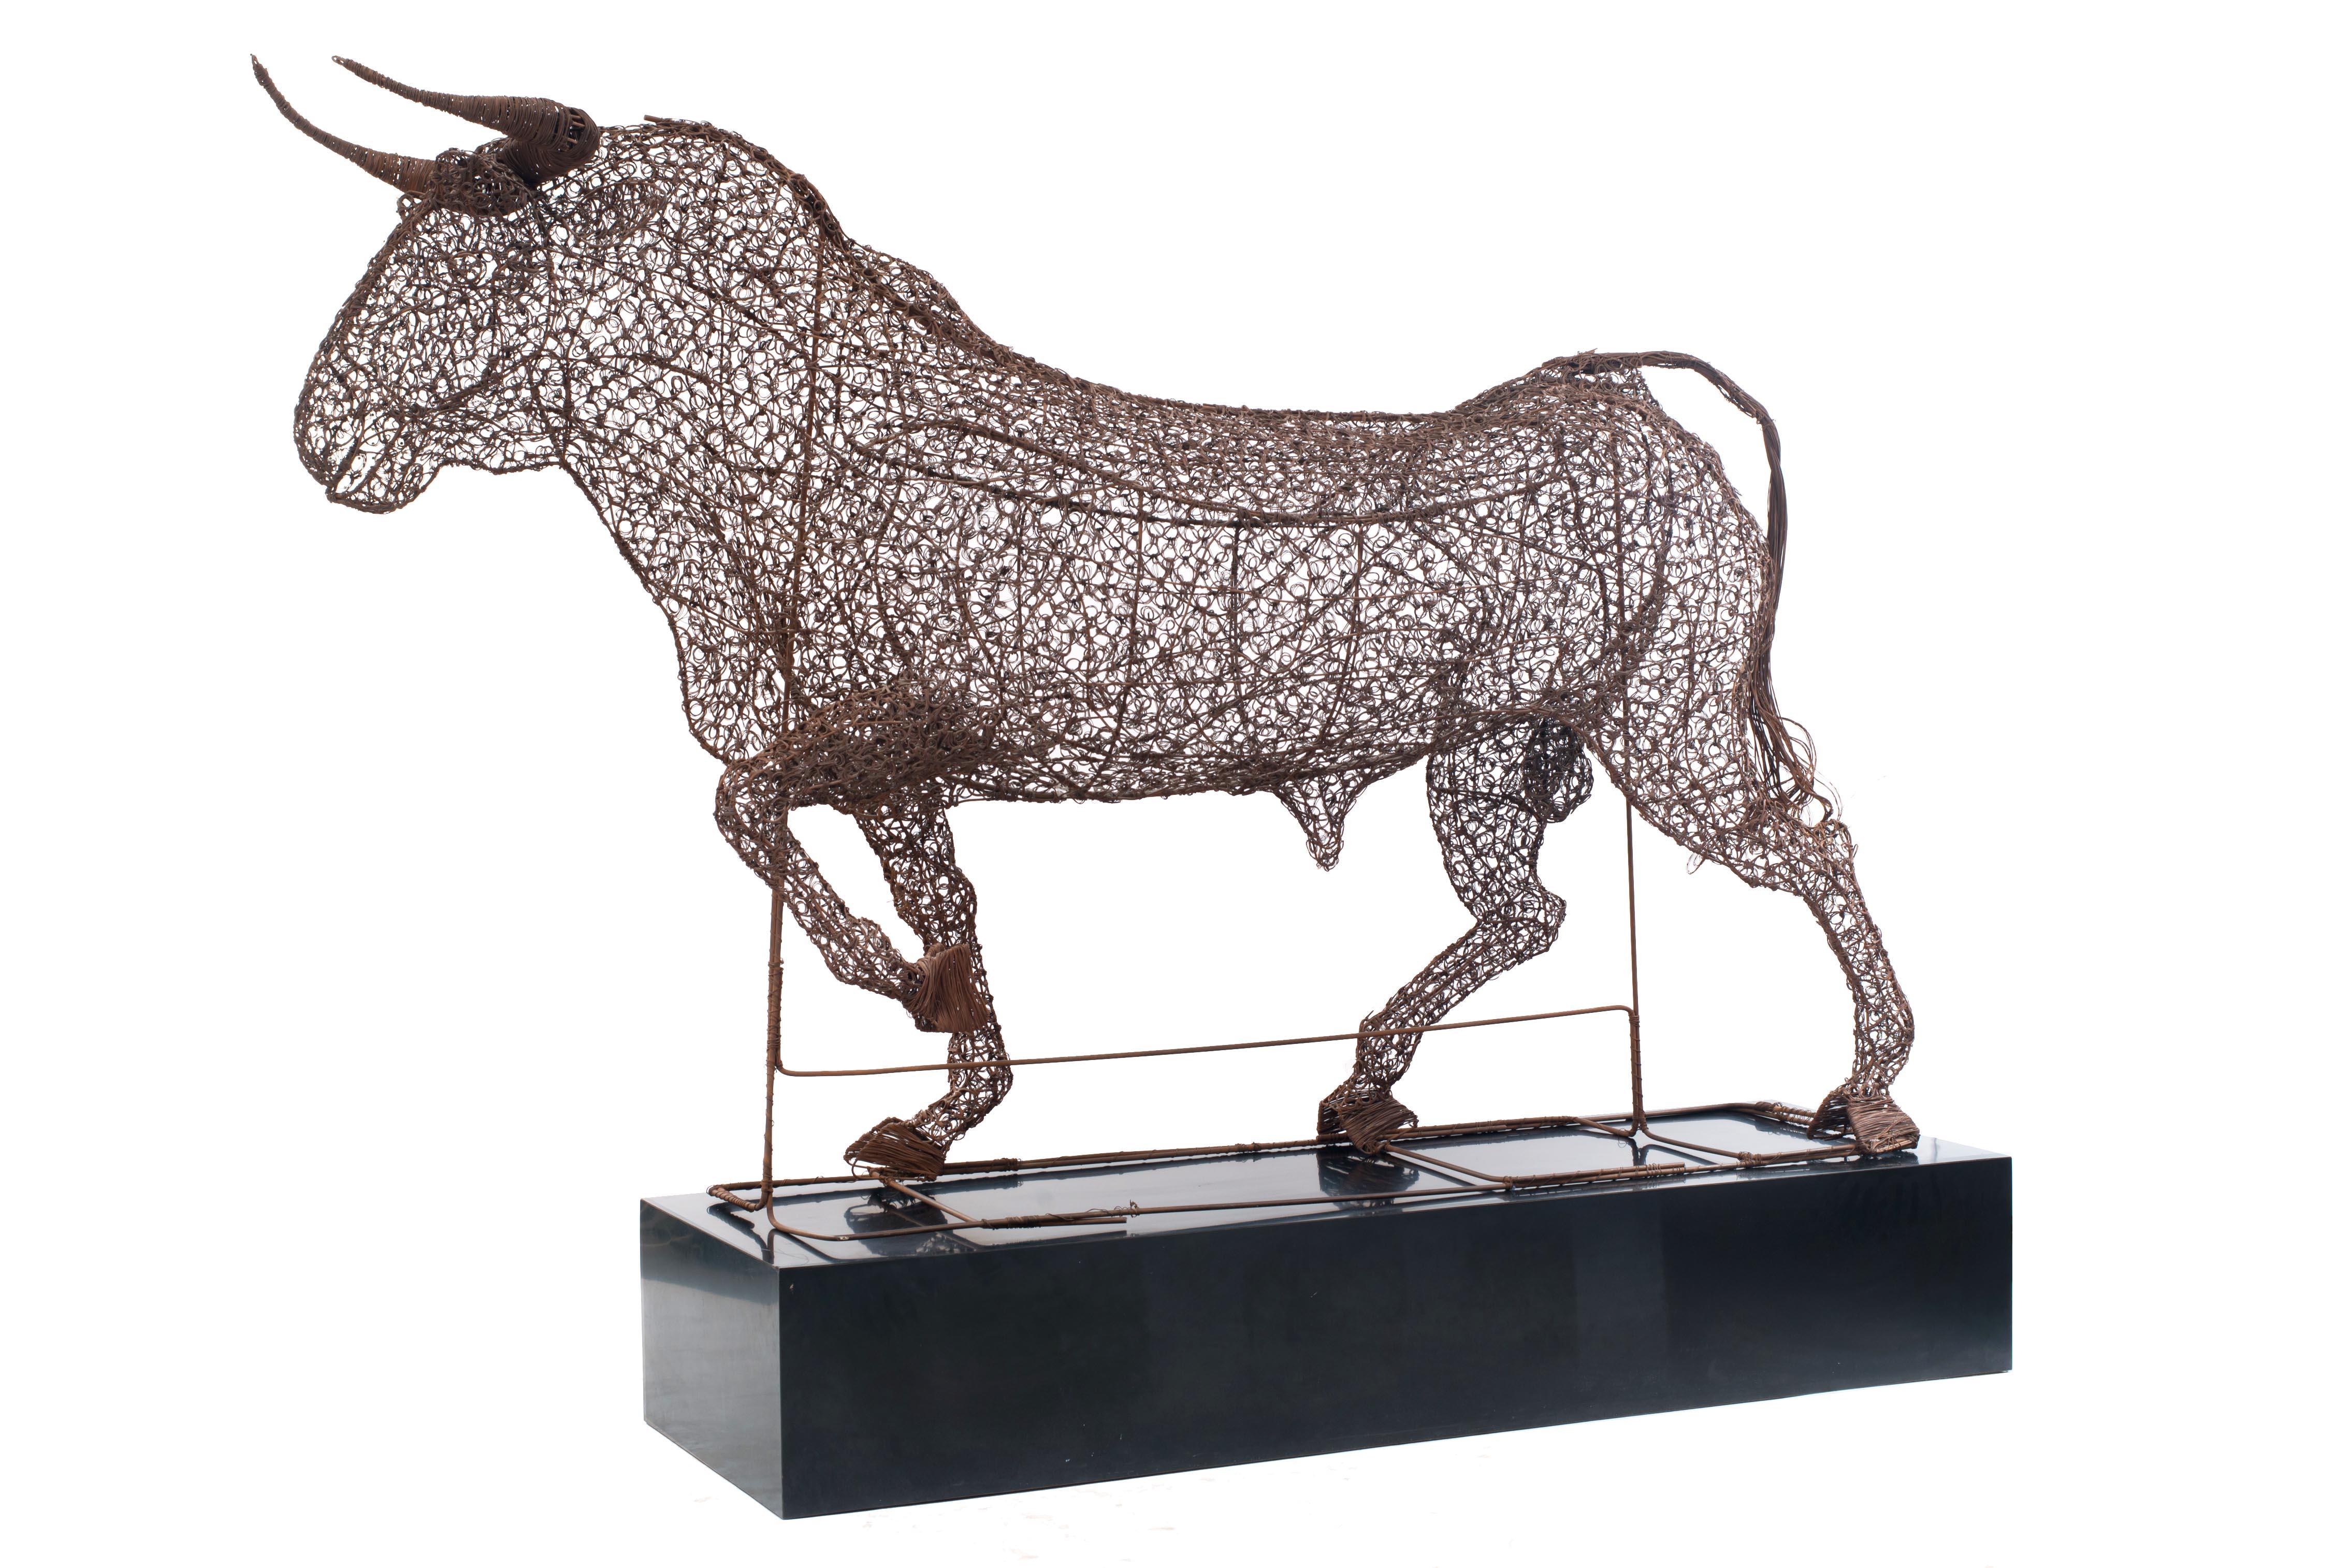 Spanish-style life size wire bull figure resting on a black plinth (1950s).
     